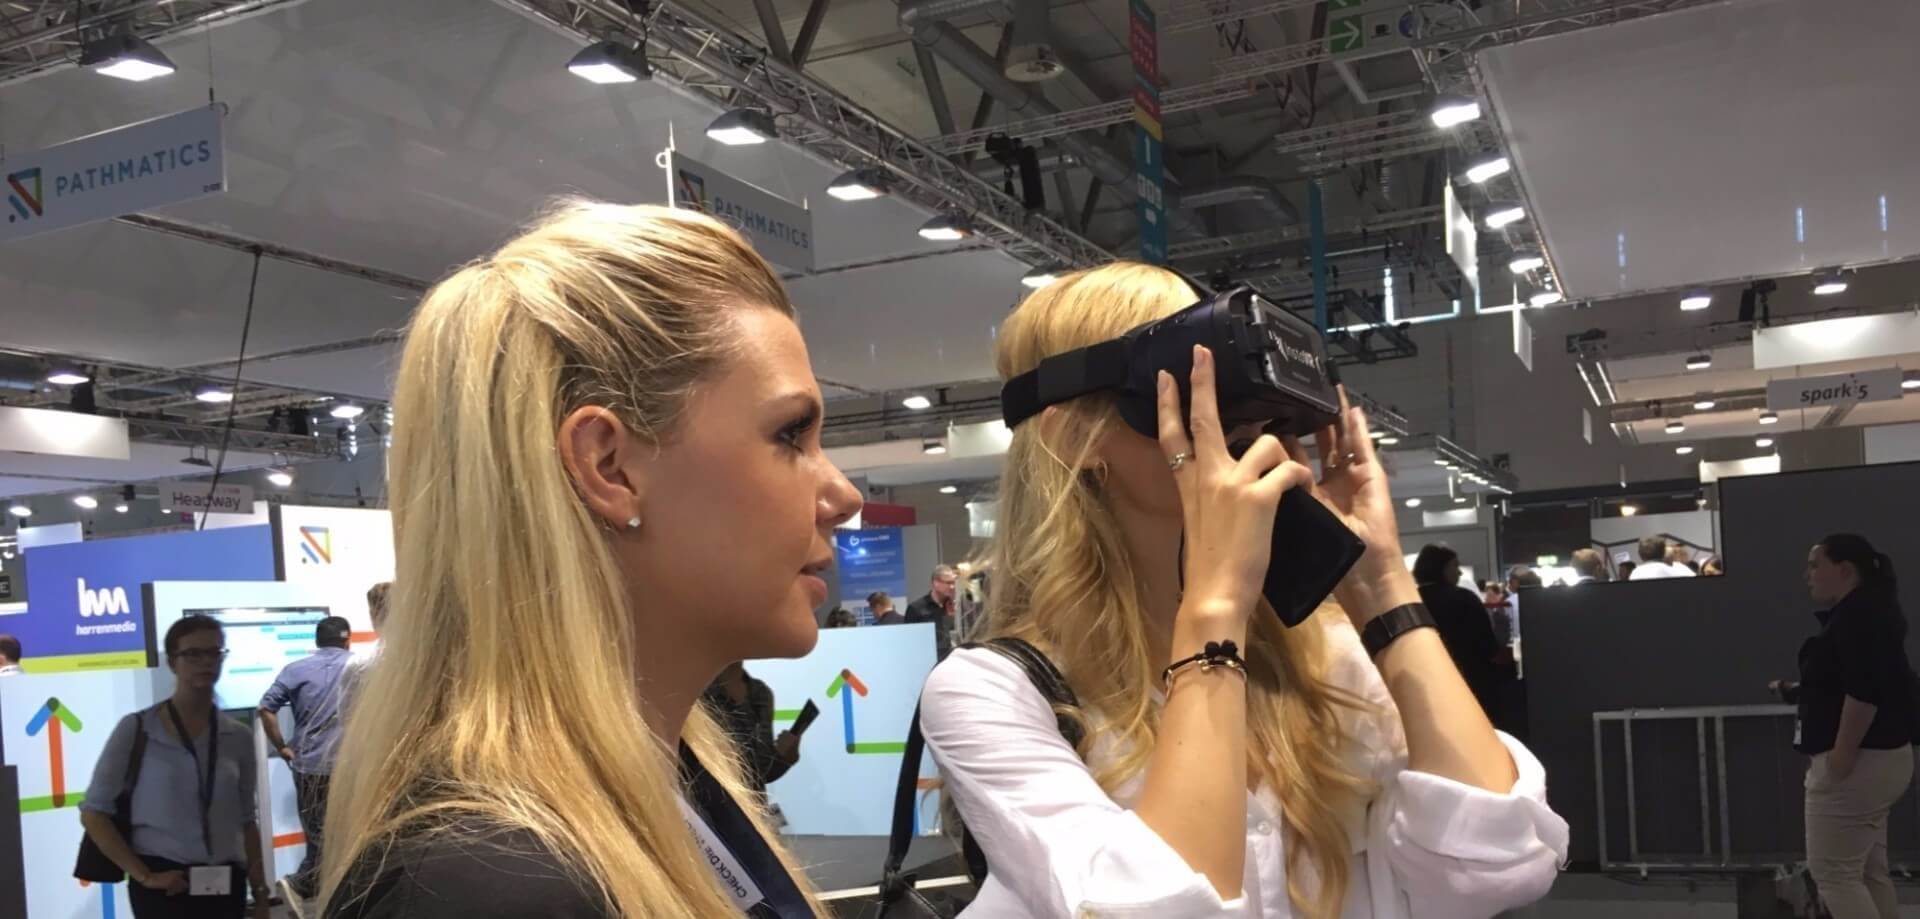 How Marketing Agencies Can Harness VR in Their Next Campaign